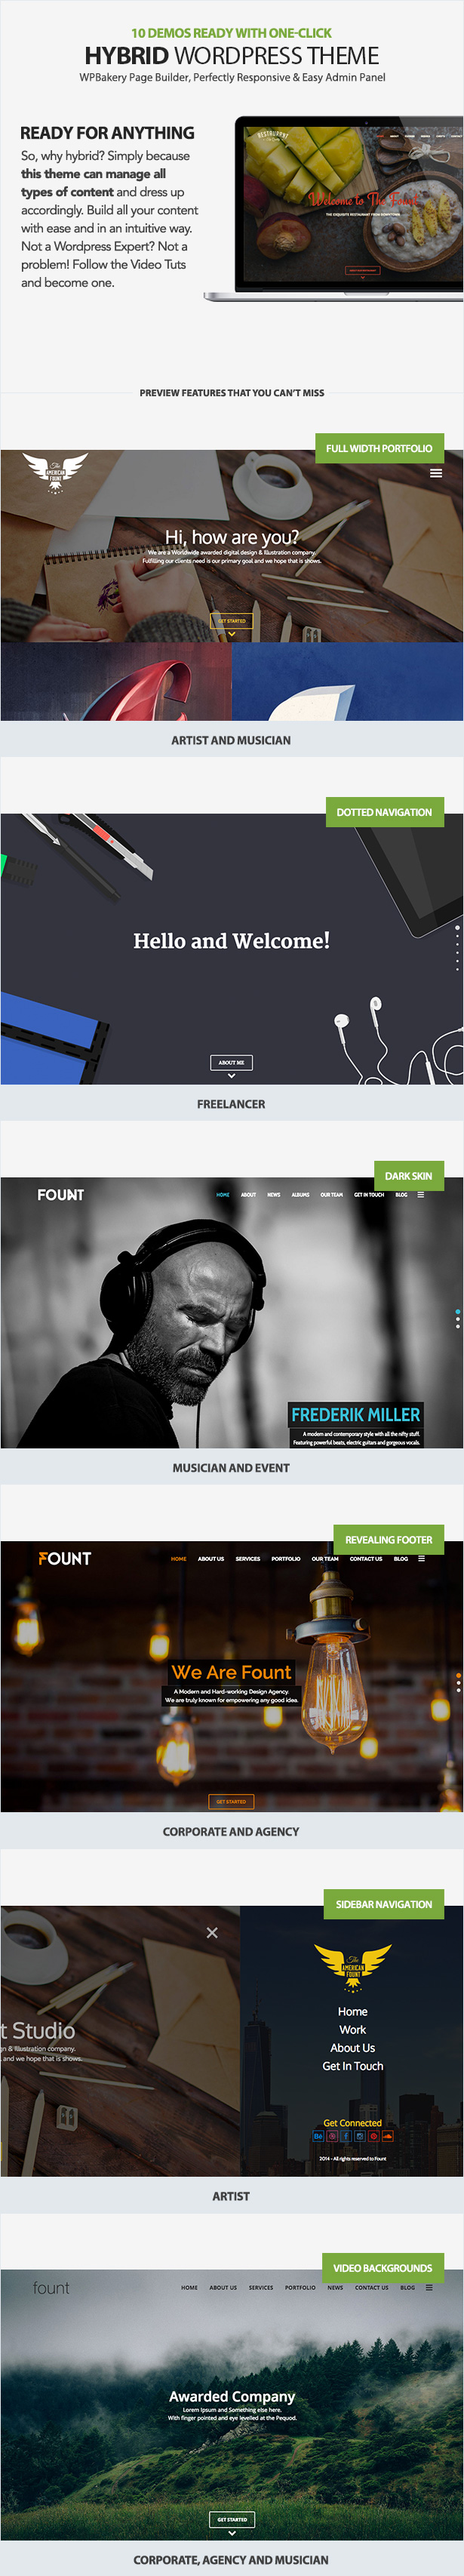 fount top 21 - Fount - One & Multipage Hybrid WordPress Theme